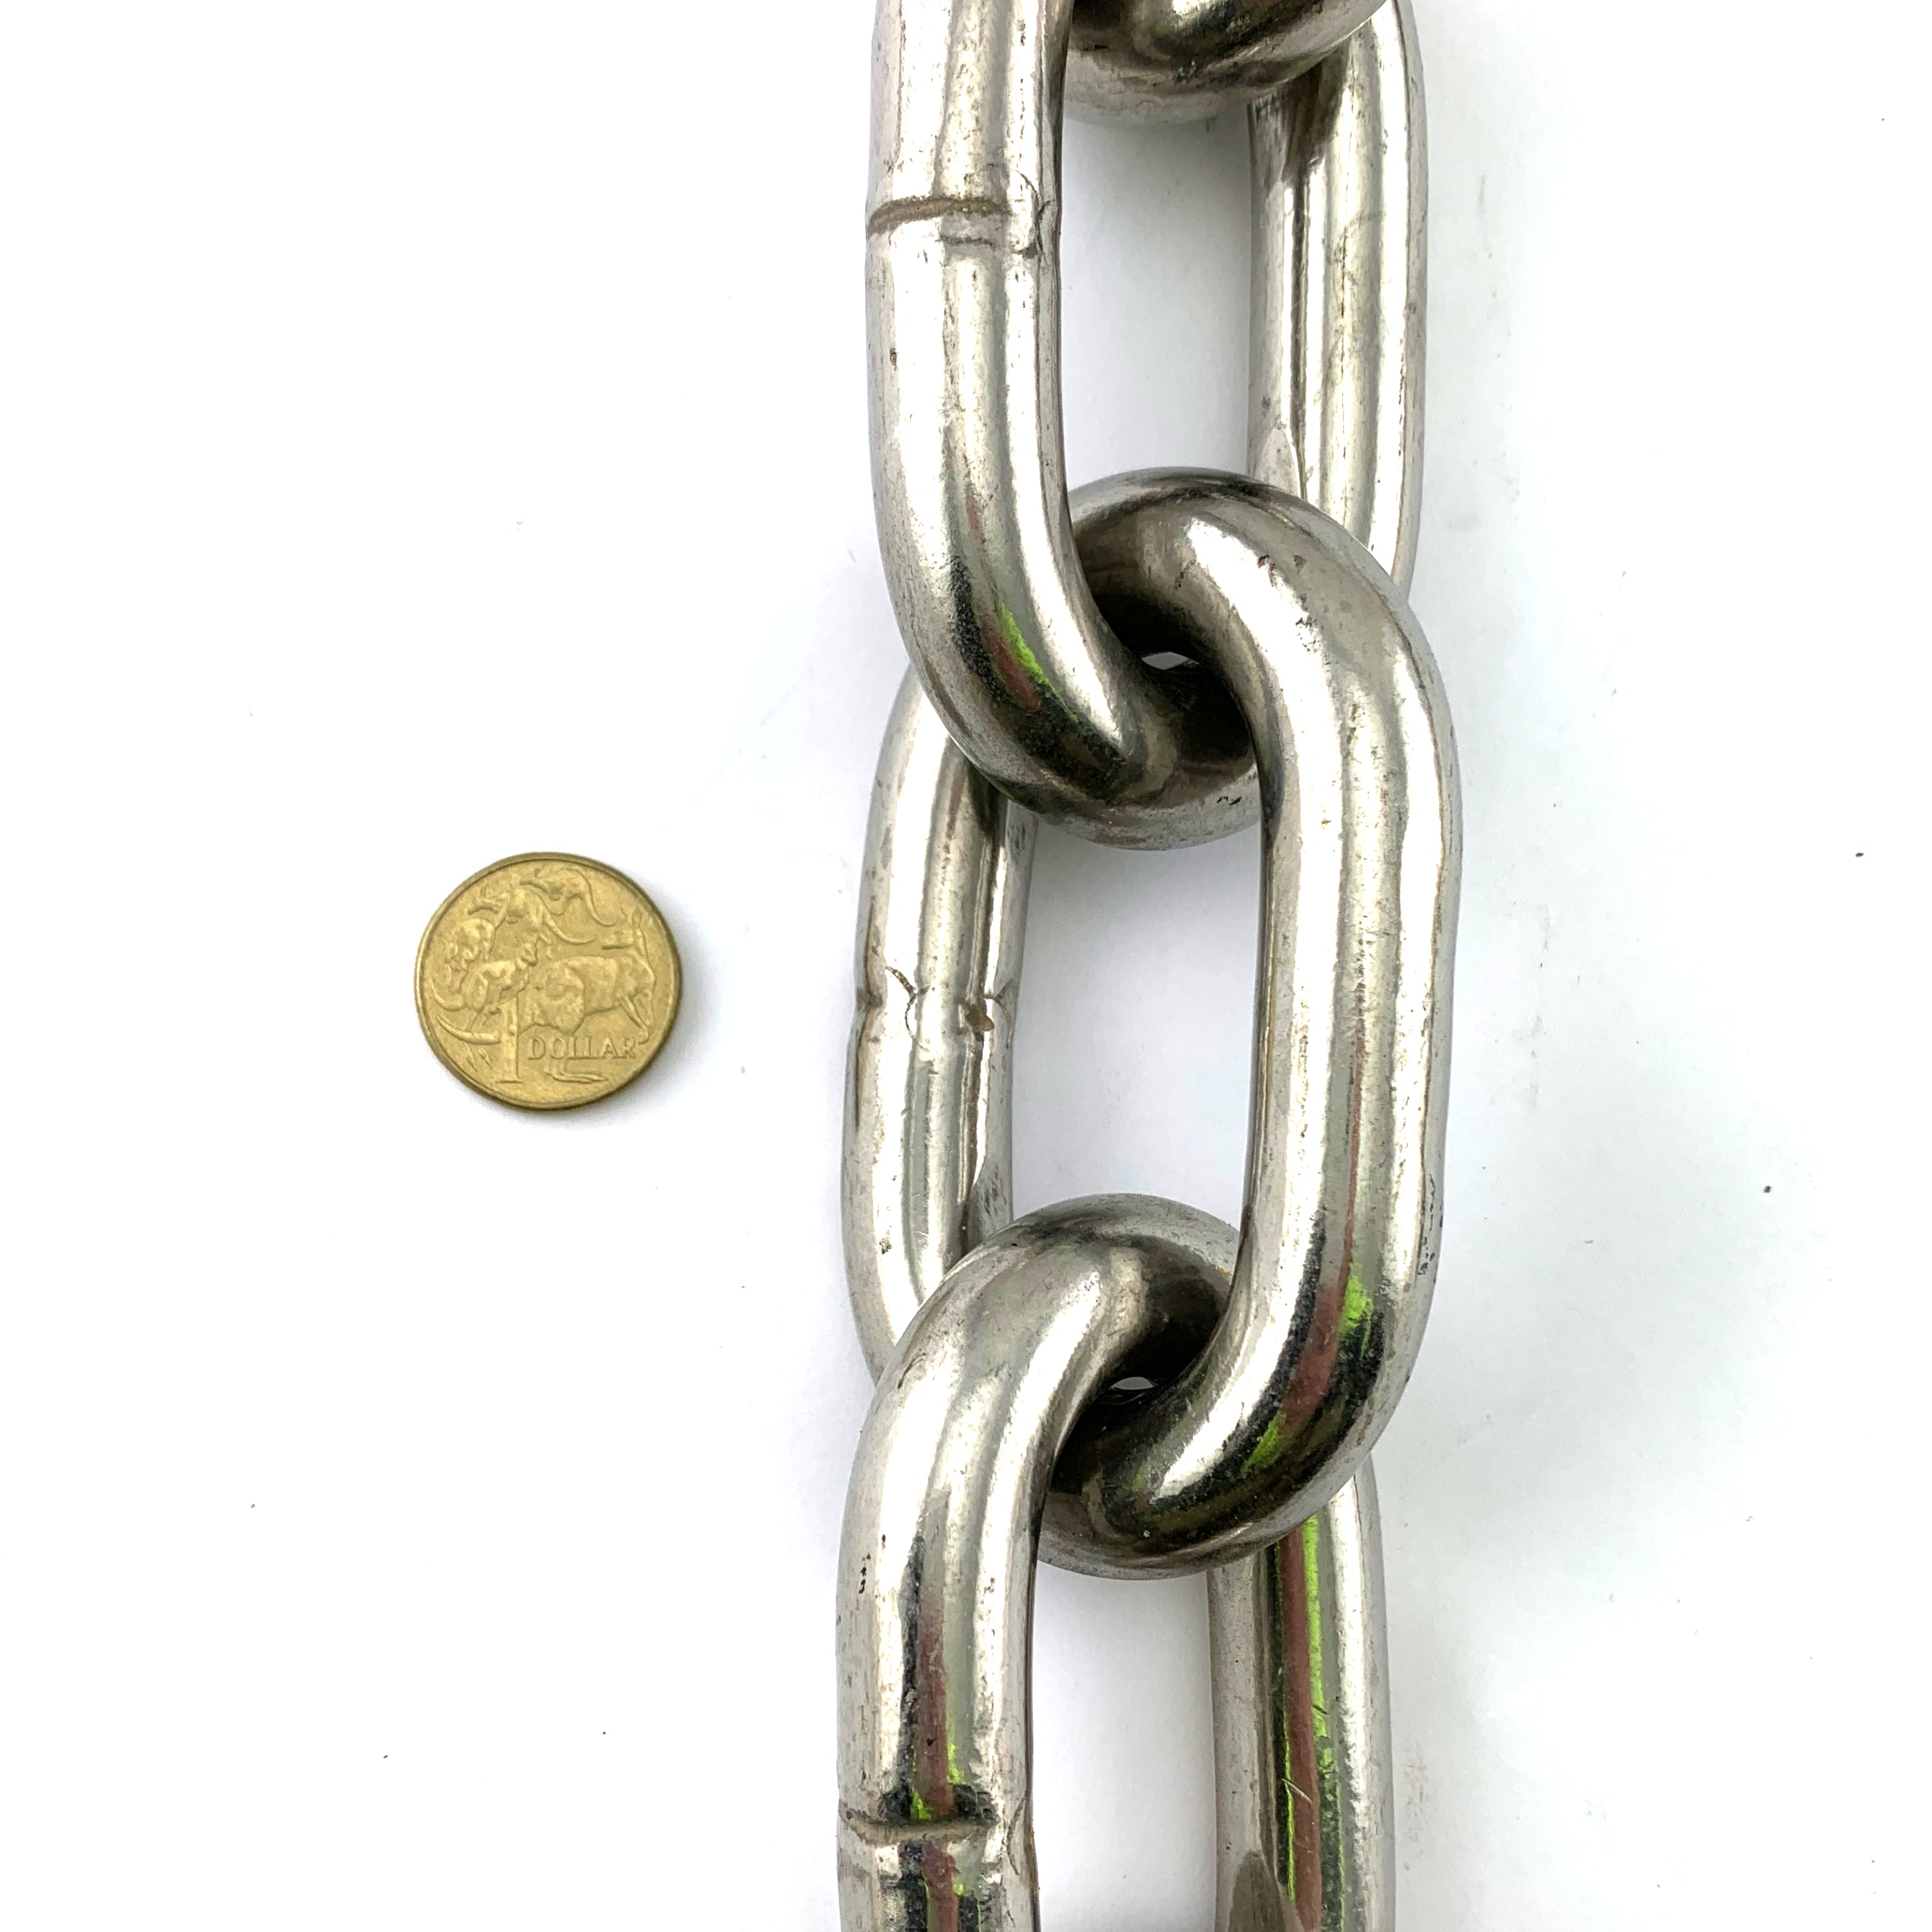 16mm stainless steel welded link chain in a 25kg bucket, with 5 metres of chain. Melbourne, Australia